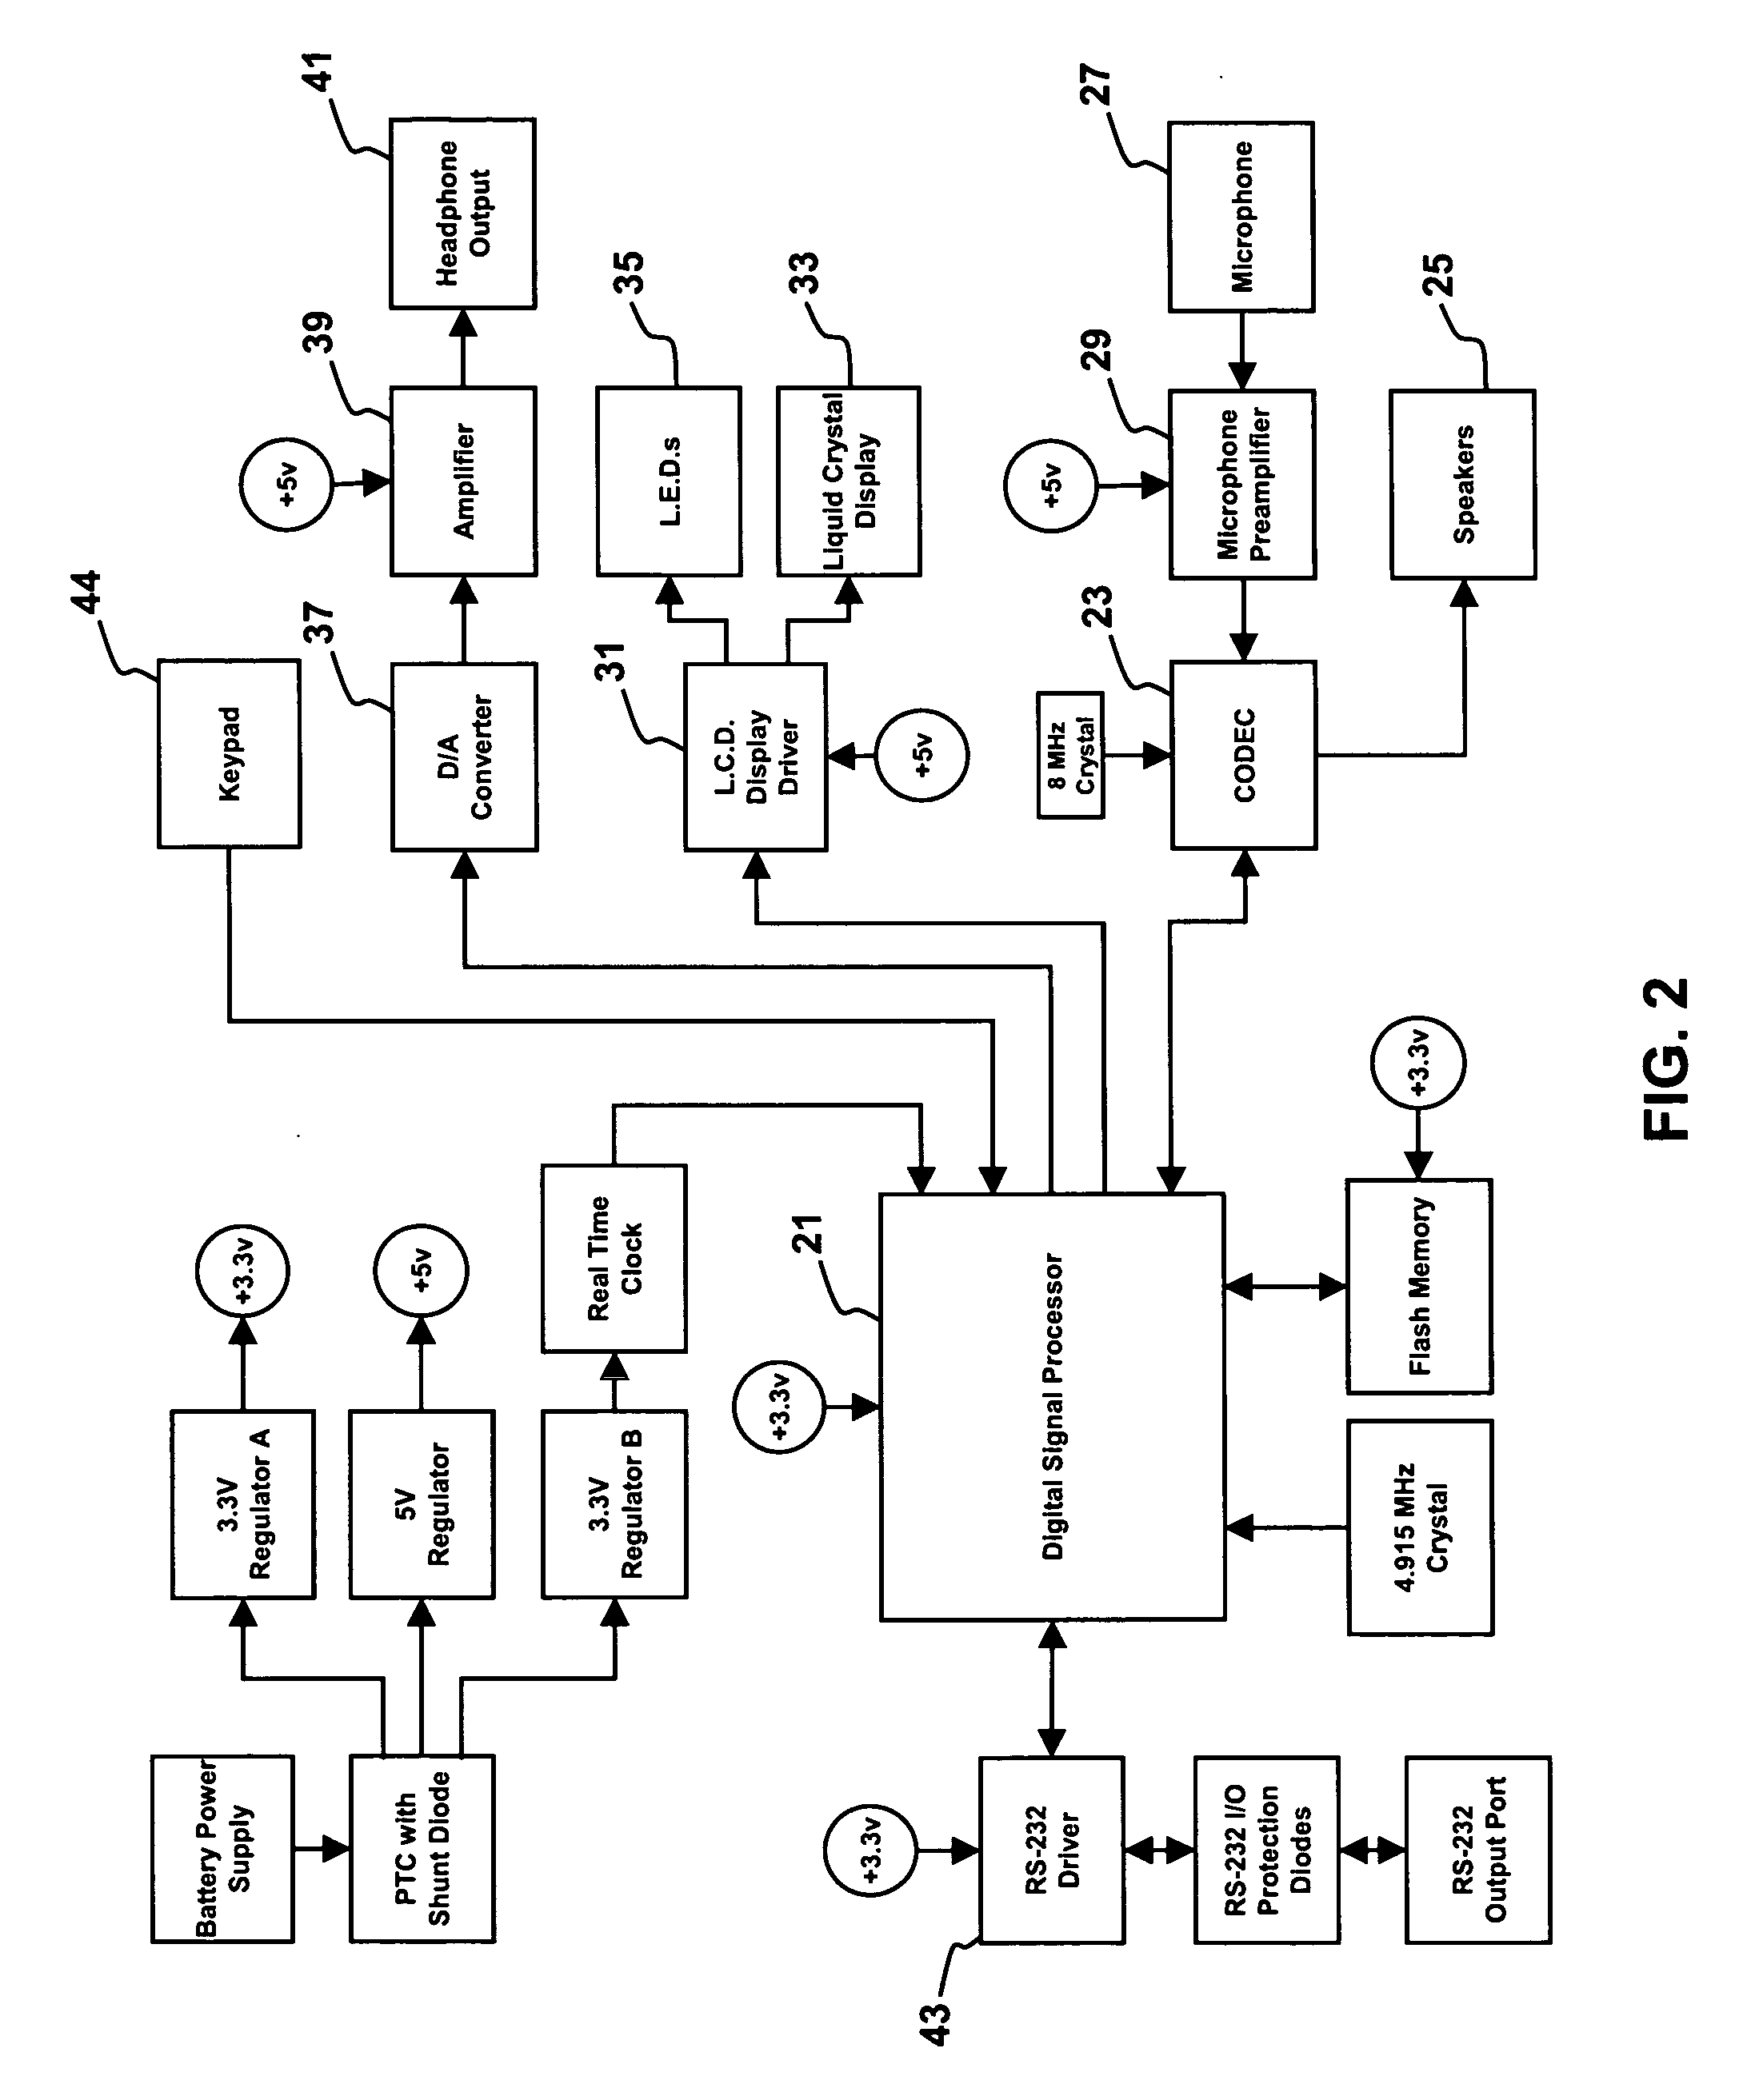 Hearing test apparatus and method having automatic starting functionality